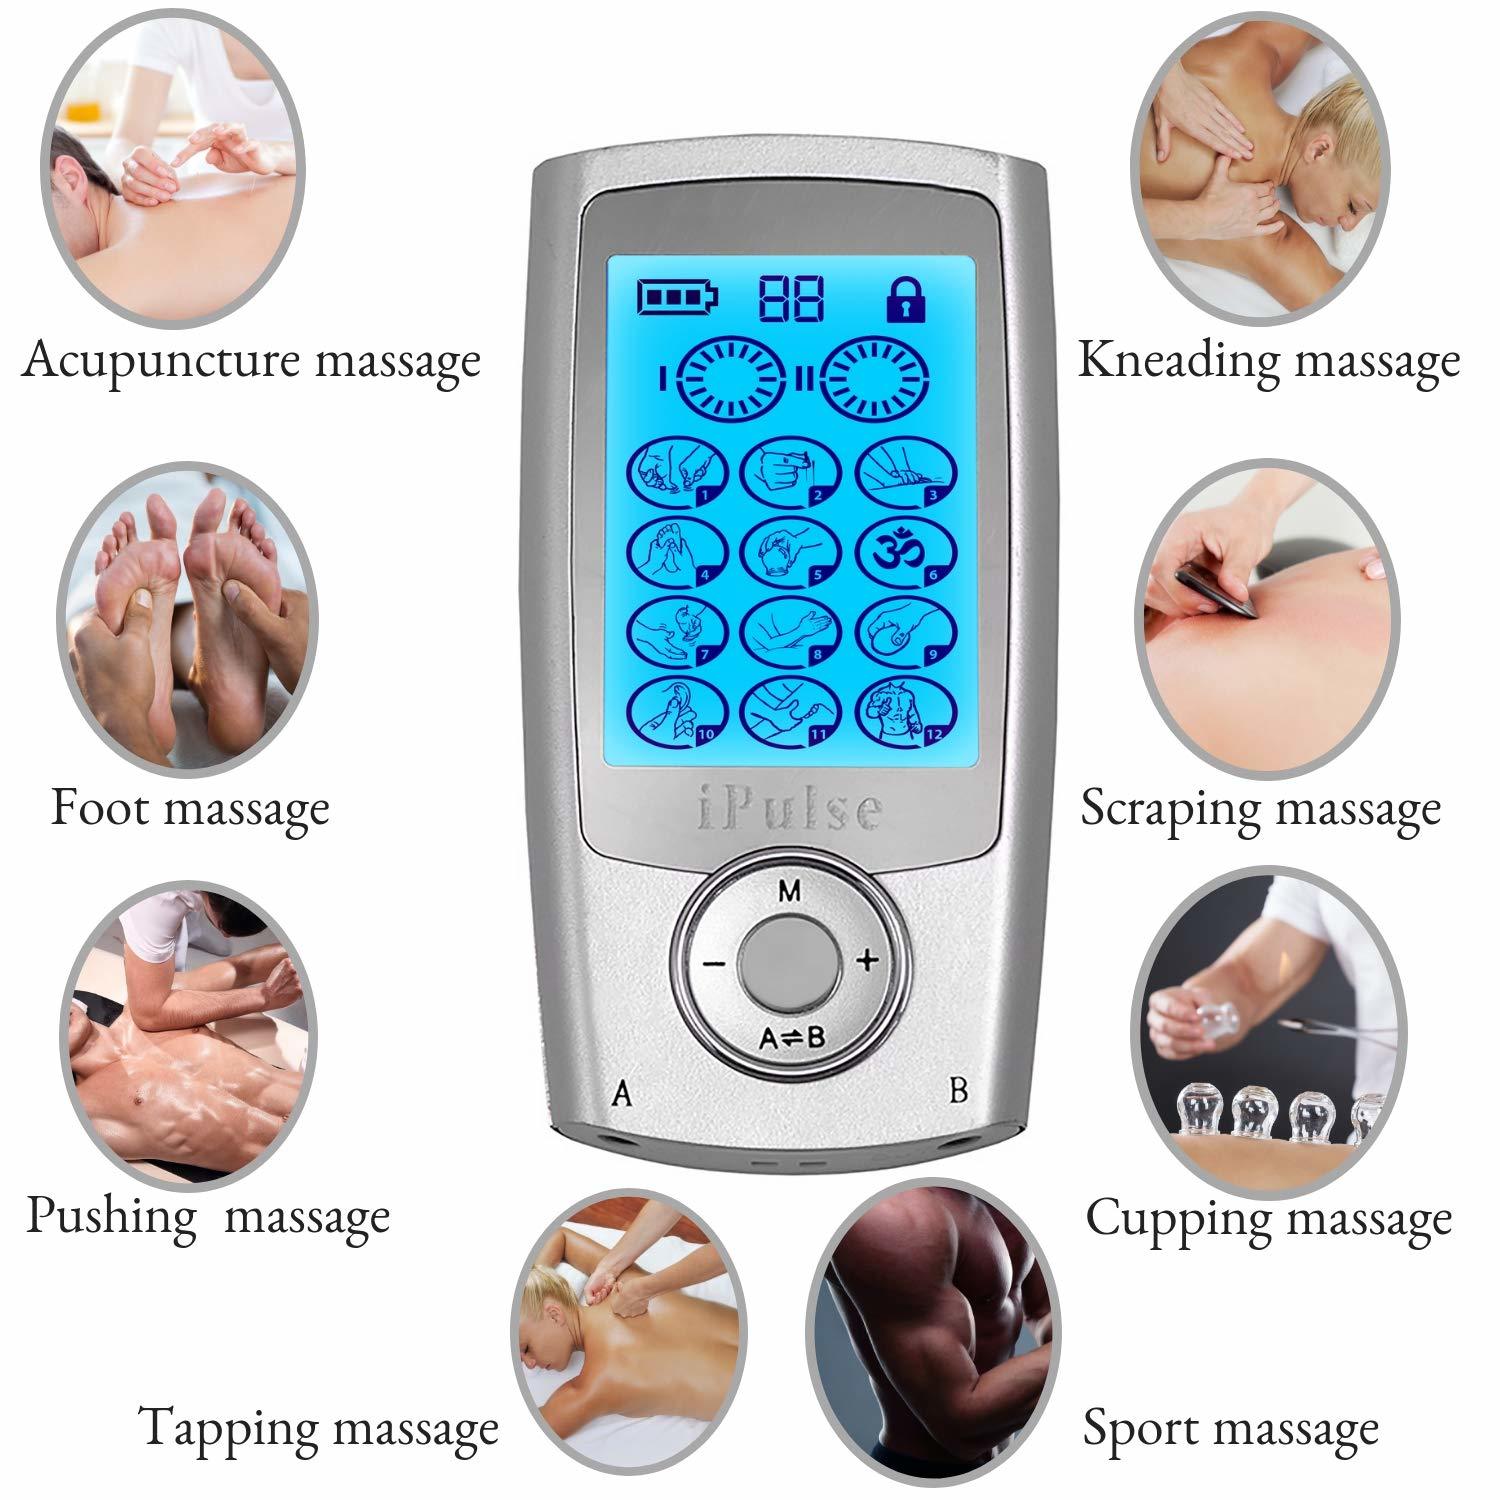 ipulse massager review and ratings